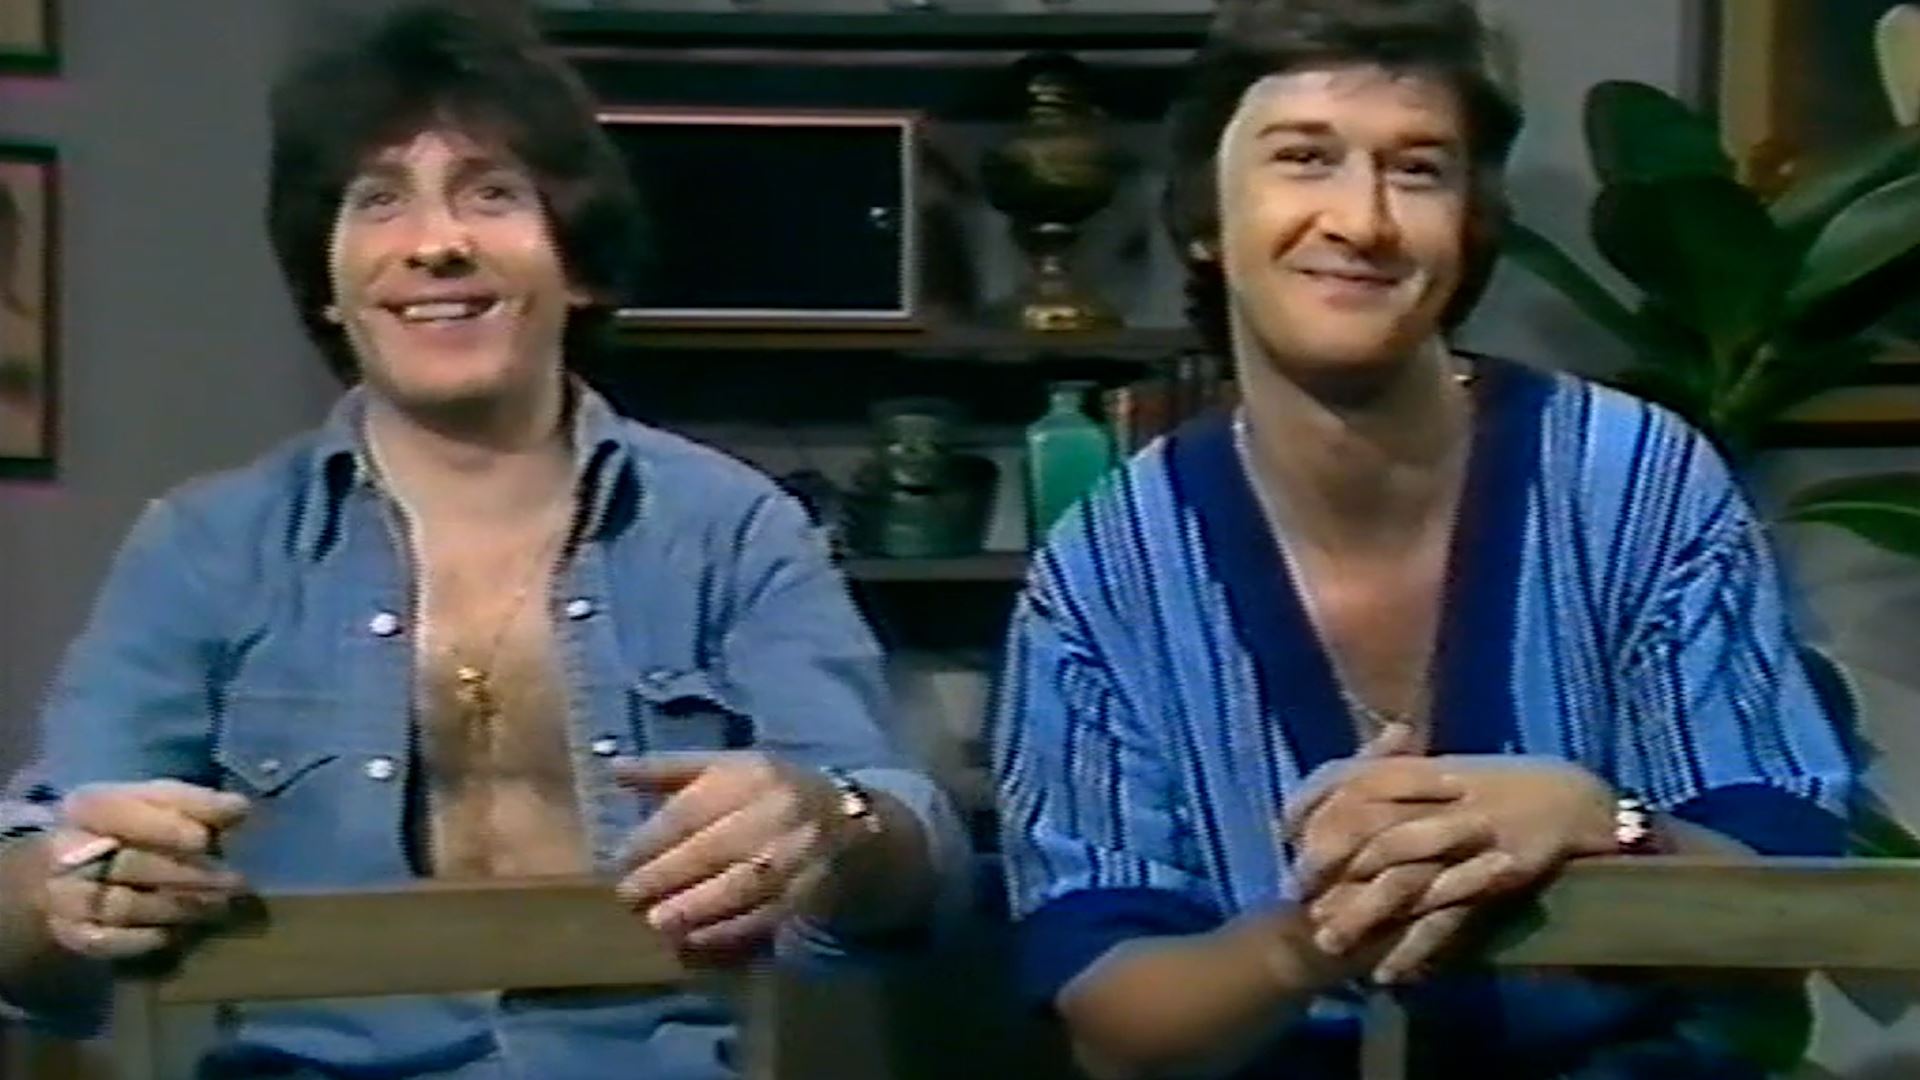 Two masc people wearing open blue shirts smile at the camera. Based on the quality of the image, it looks like an old TV show.